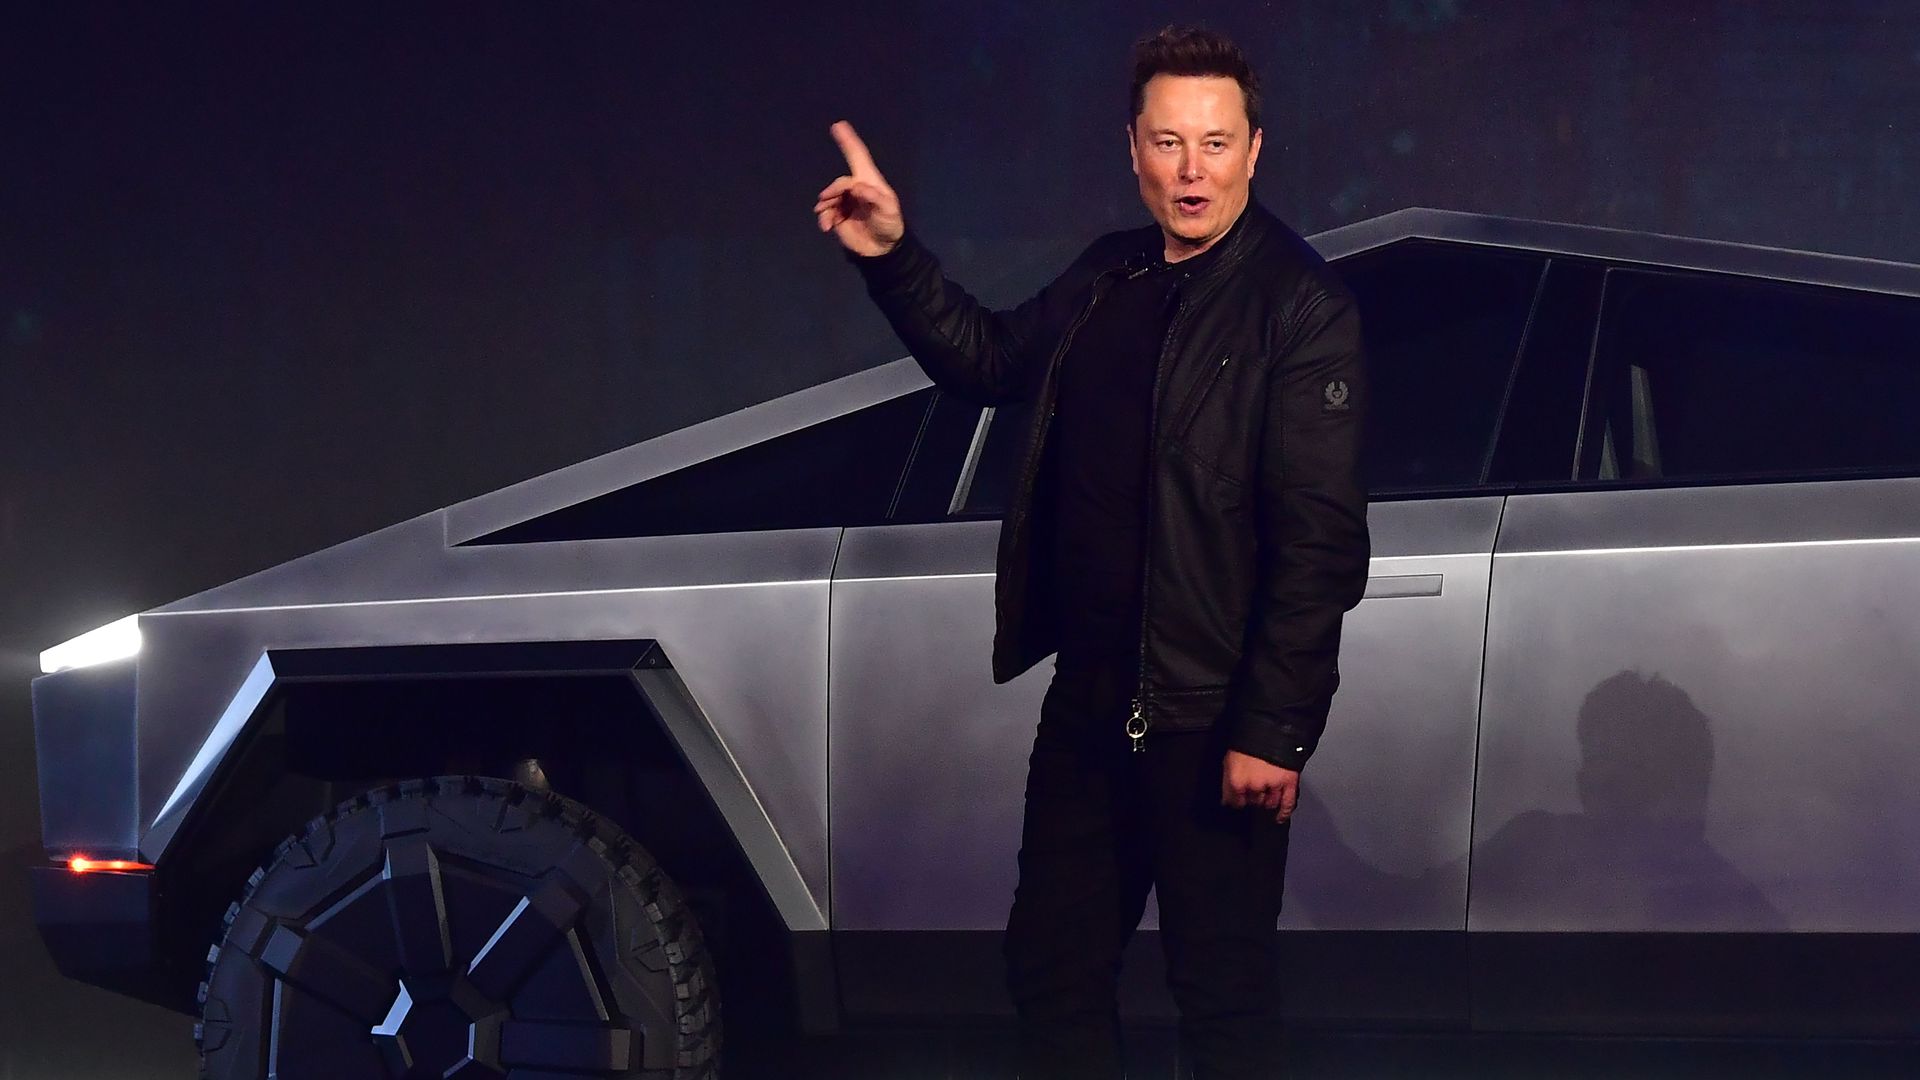 Tesla co-founder and CEO Elon Musk gestures while introducing the newly unveiled all-electric battery-powered Tesla Cybertruck 